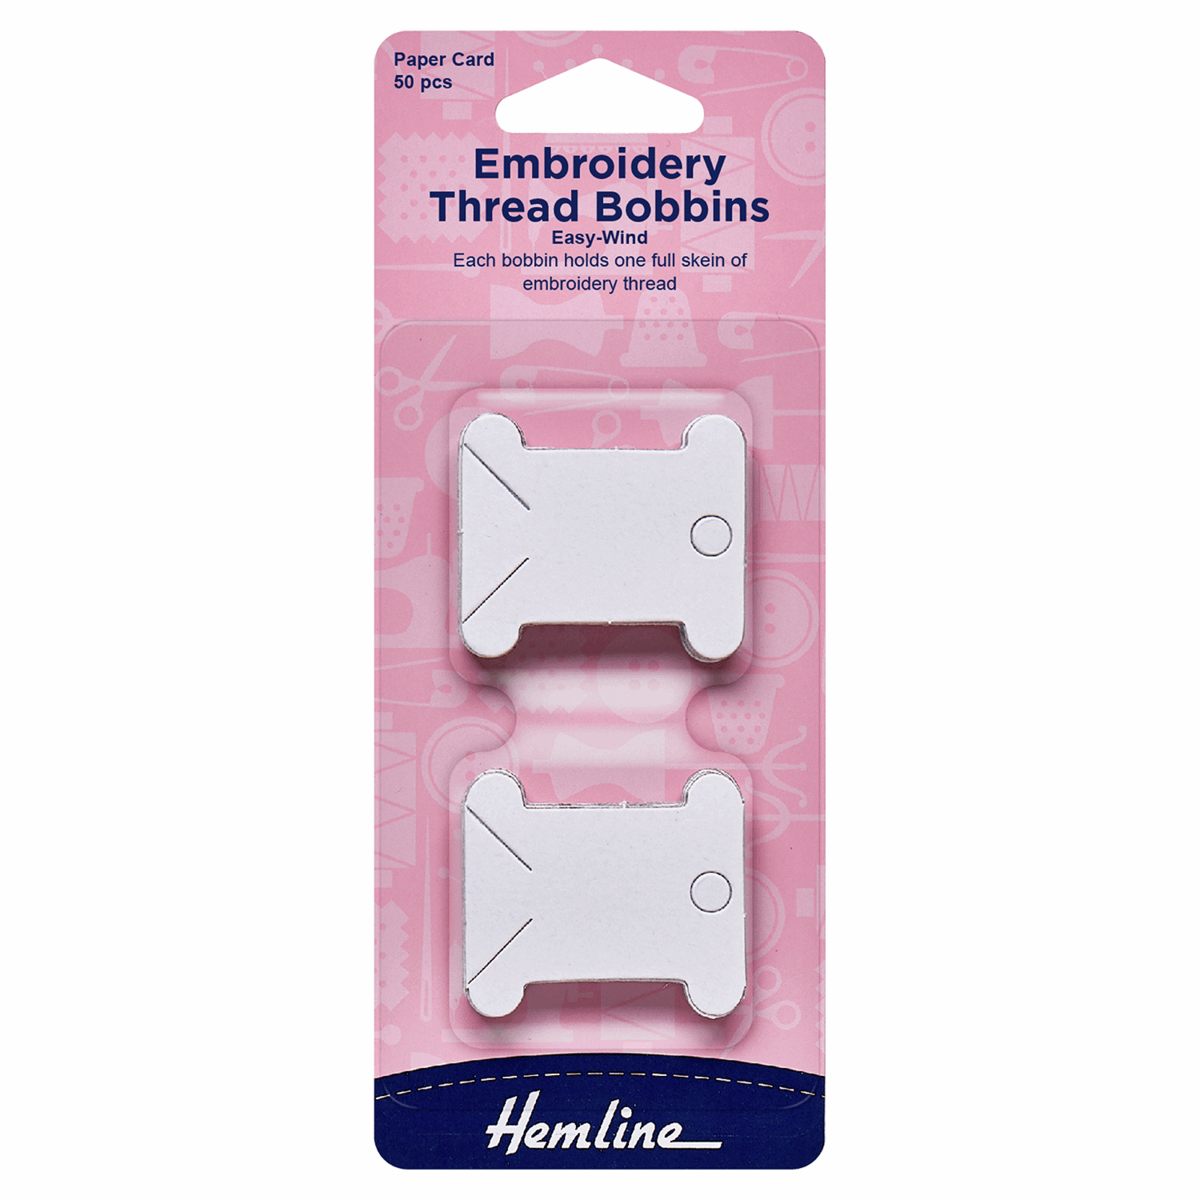 Embroidery Thread Bobbins: Paper: 50 Pieces by Hemline 